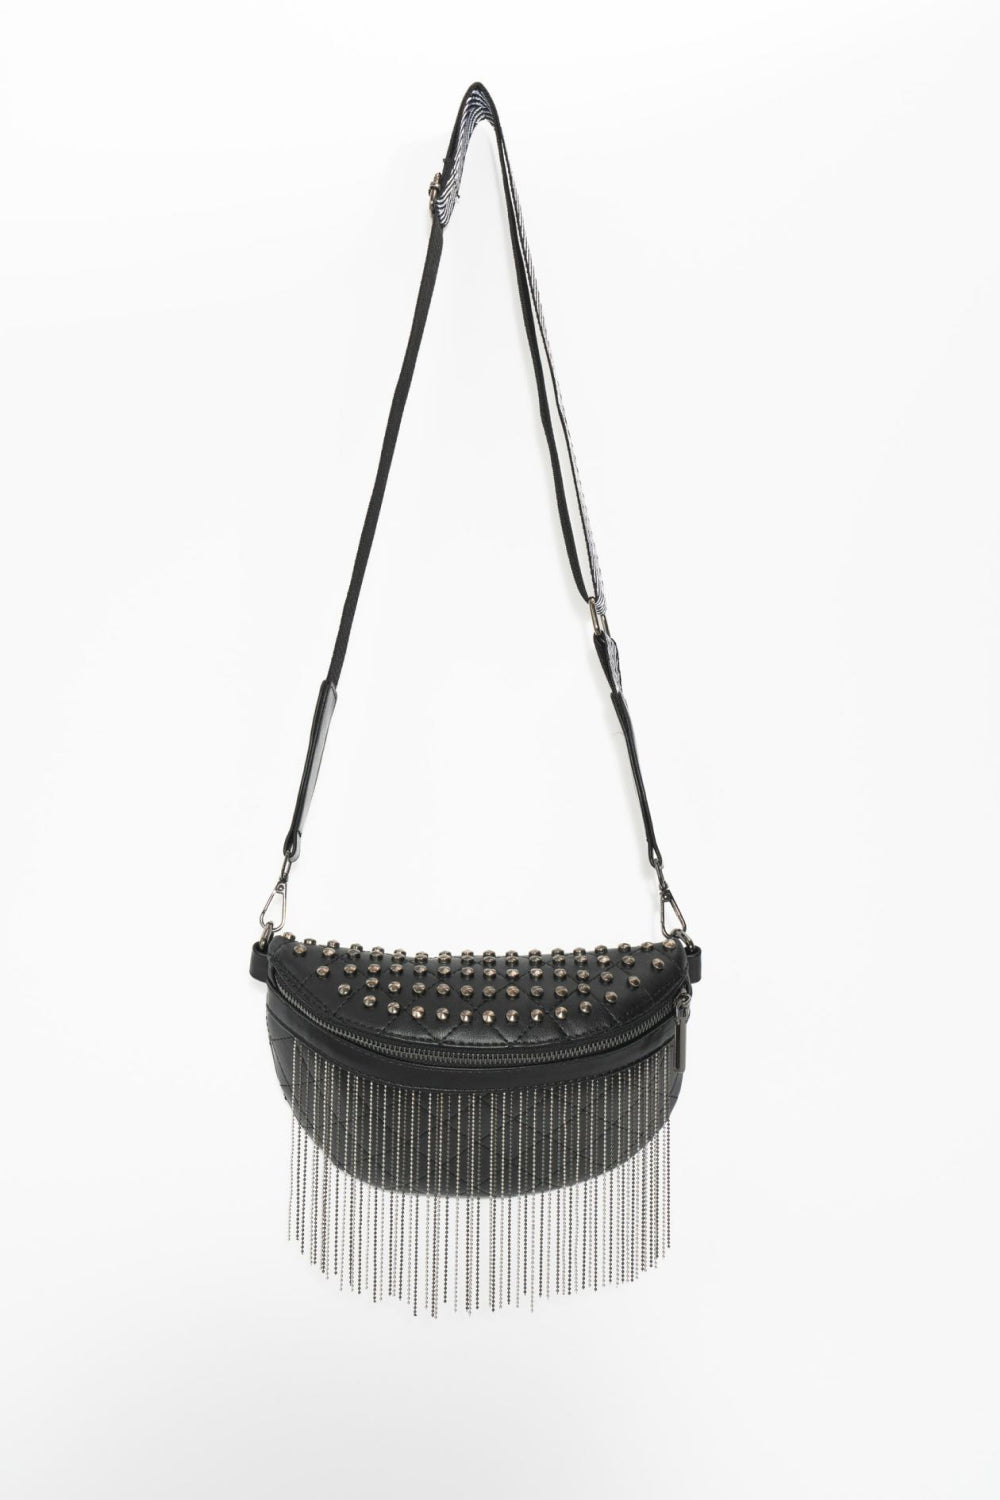 Backstage Studded Belt Bag with Fringes - Cheeky Chic Boutique